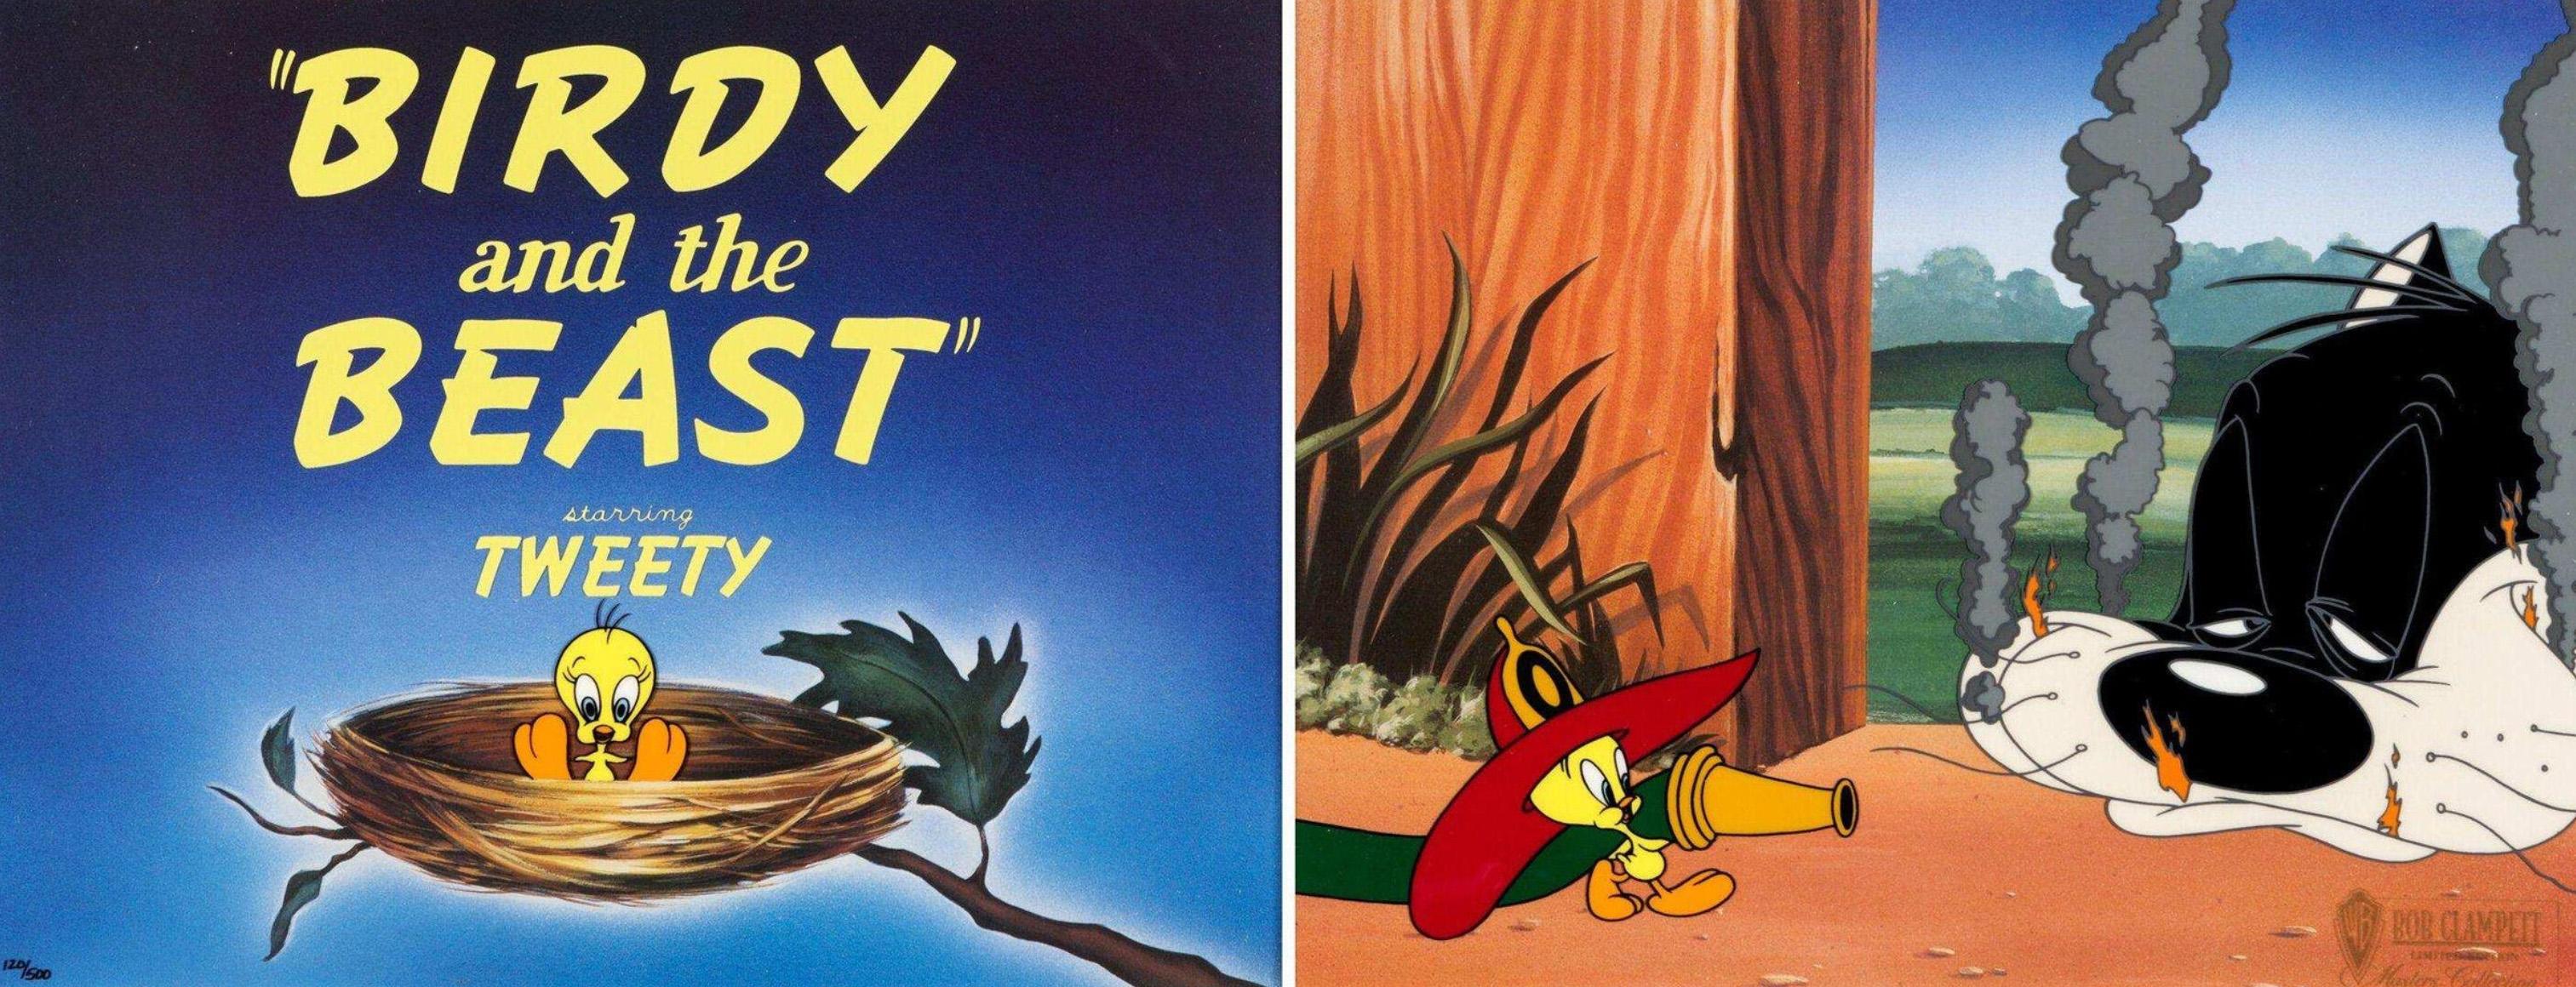 Birdy And The Beast Pair of Limited Edition Cels - Art by Bob Clampett